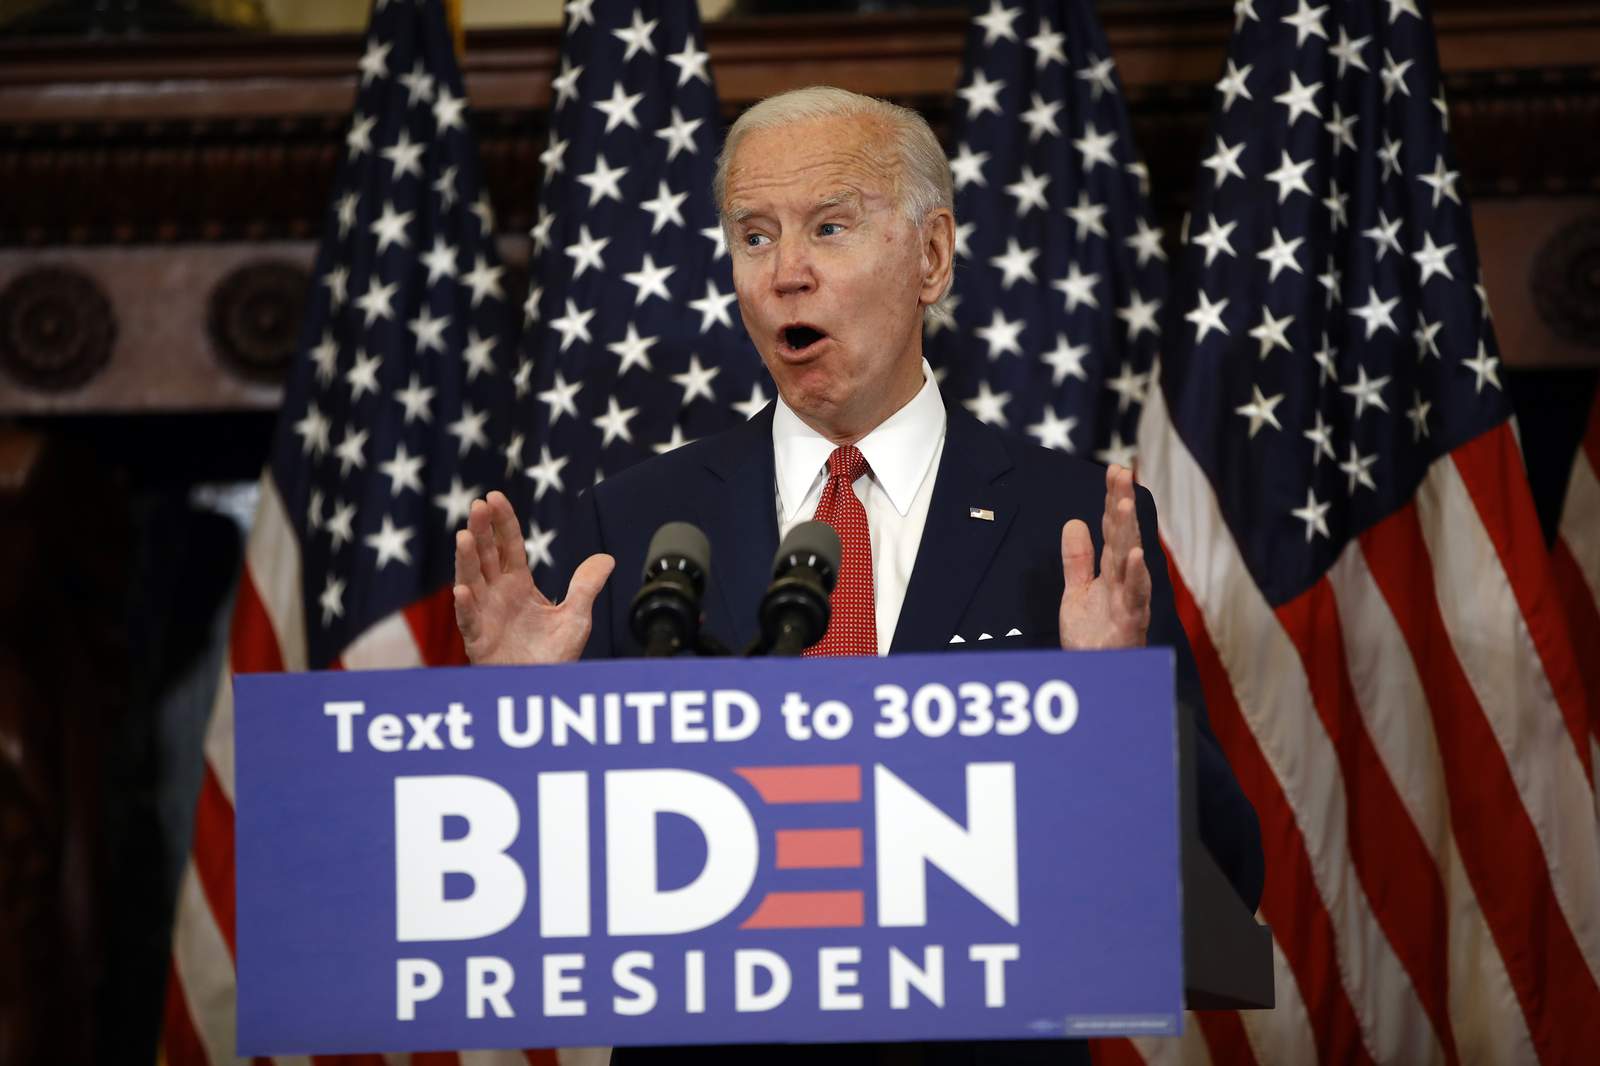 Biden blasts Trump's 'narcissism' in new phase of campaign